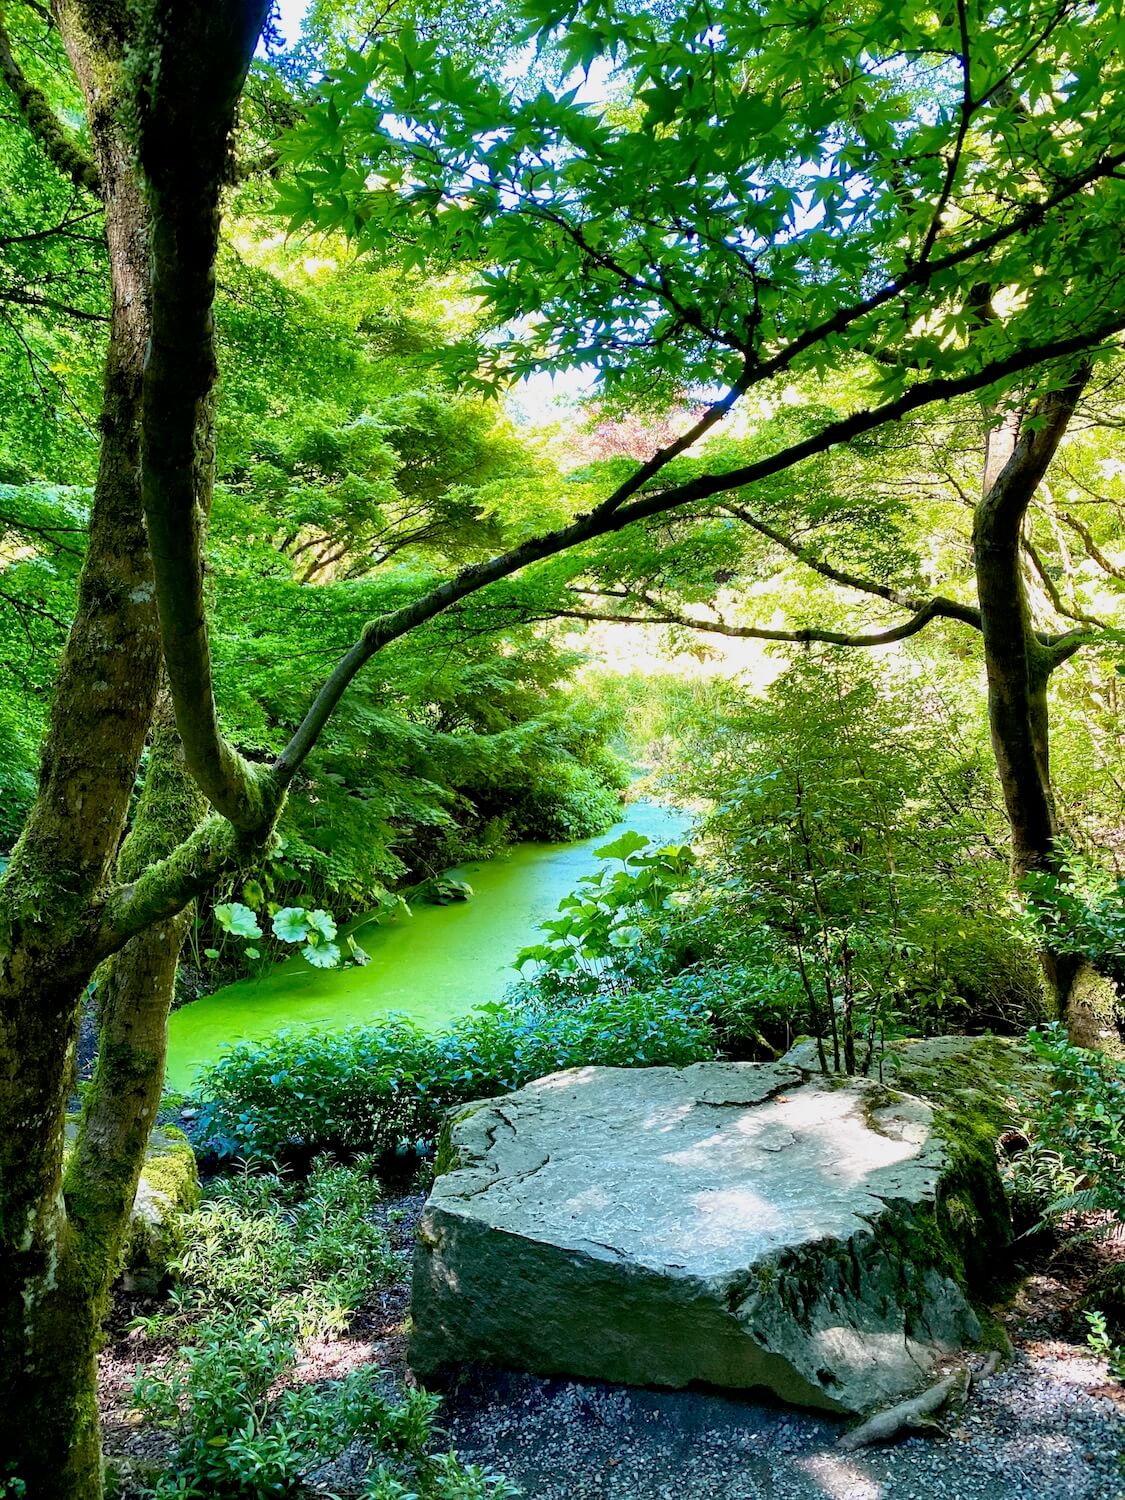 A quietness stirs underneath the bright green canopy of ornate maple trees deep within a Japanese garden.  The pond nearby is covered with a green algae and a prominent rock in the foreground welcomes some green varieties of moss.  Exploring a japans inspired garden is an inspiring outdoor thing to do in Summer in Seattle. 